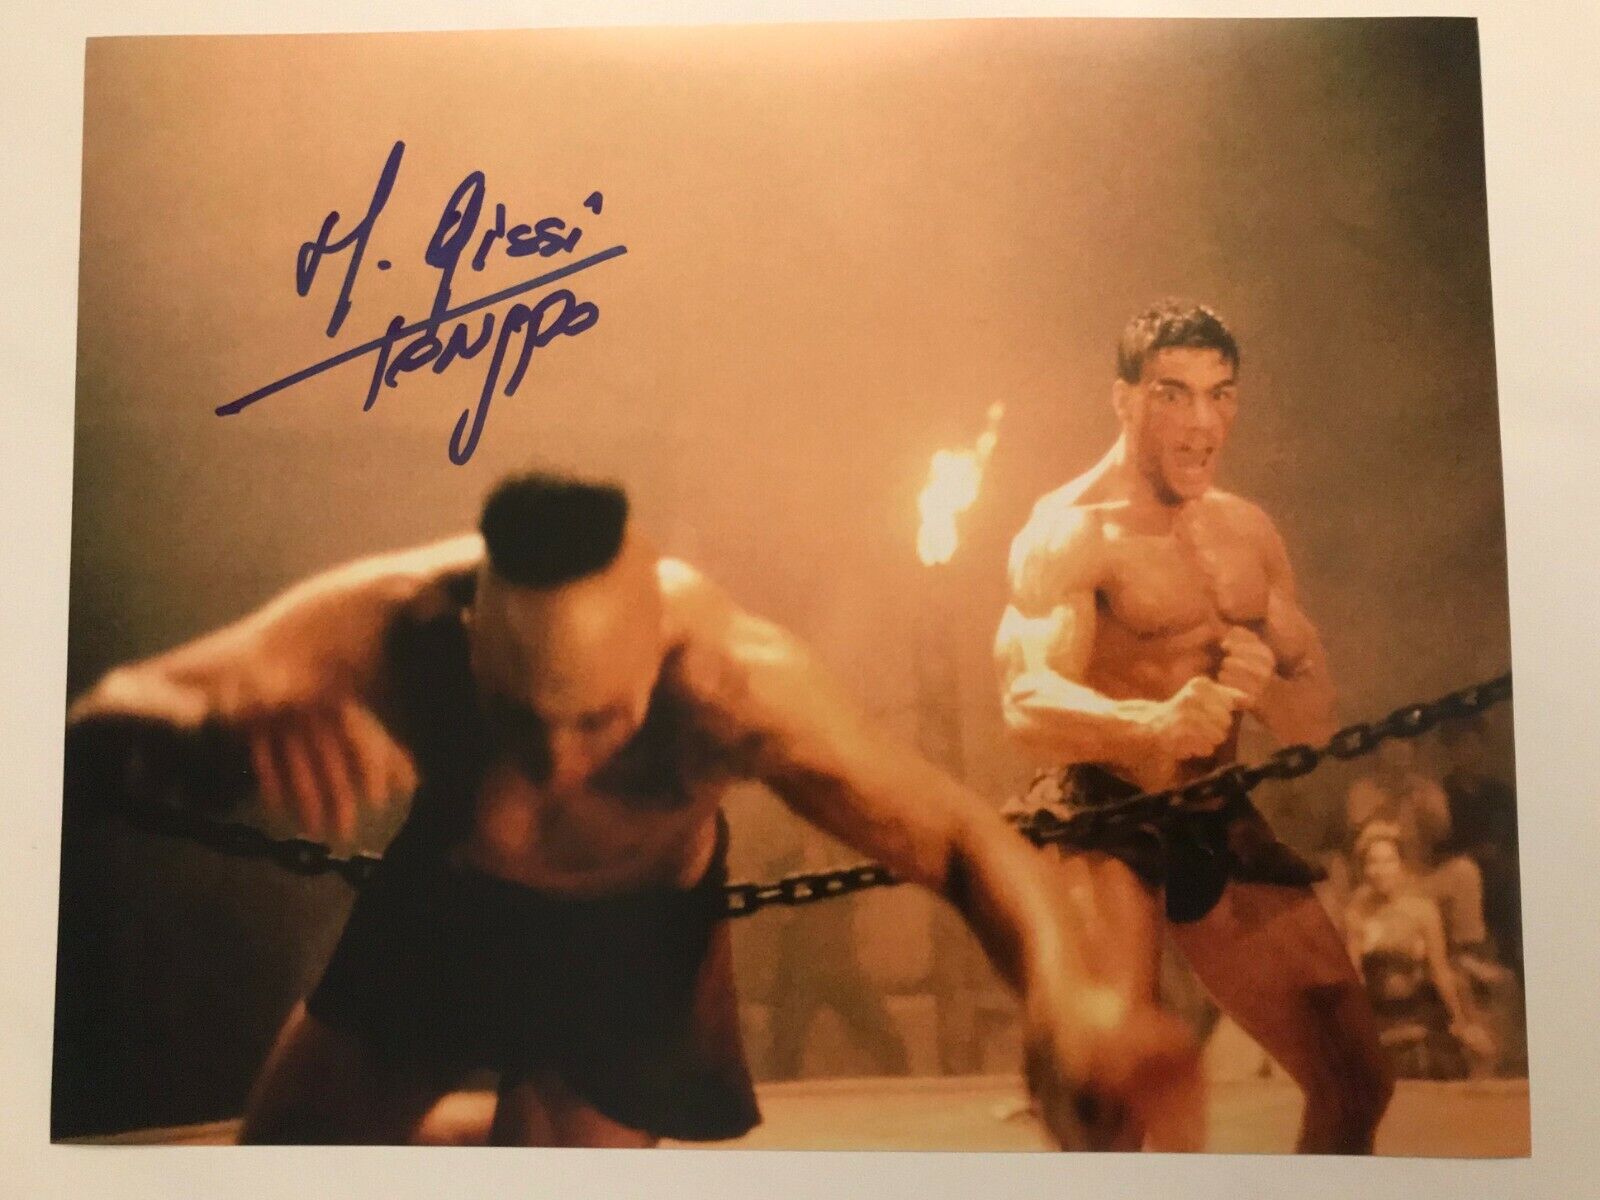 GFA Kickboxer Movie Tong Po * MICHEL QISSI * Signed 11x14 Photo Poster painting PROOF MH7 COA